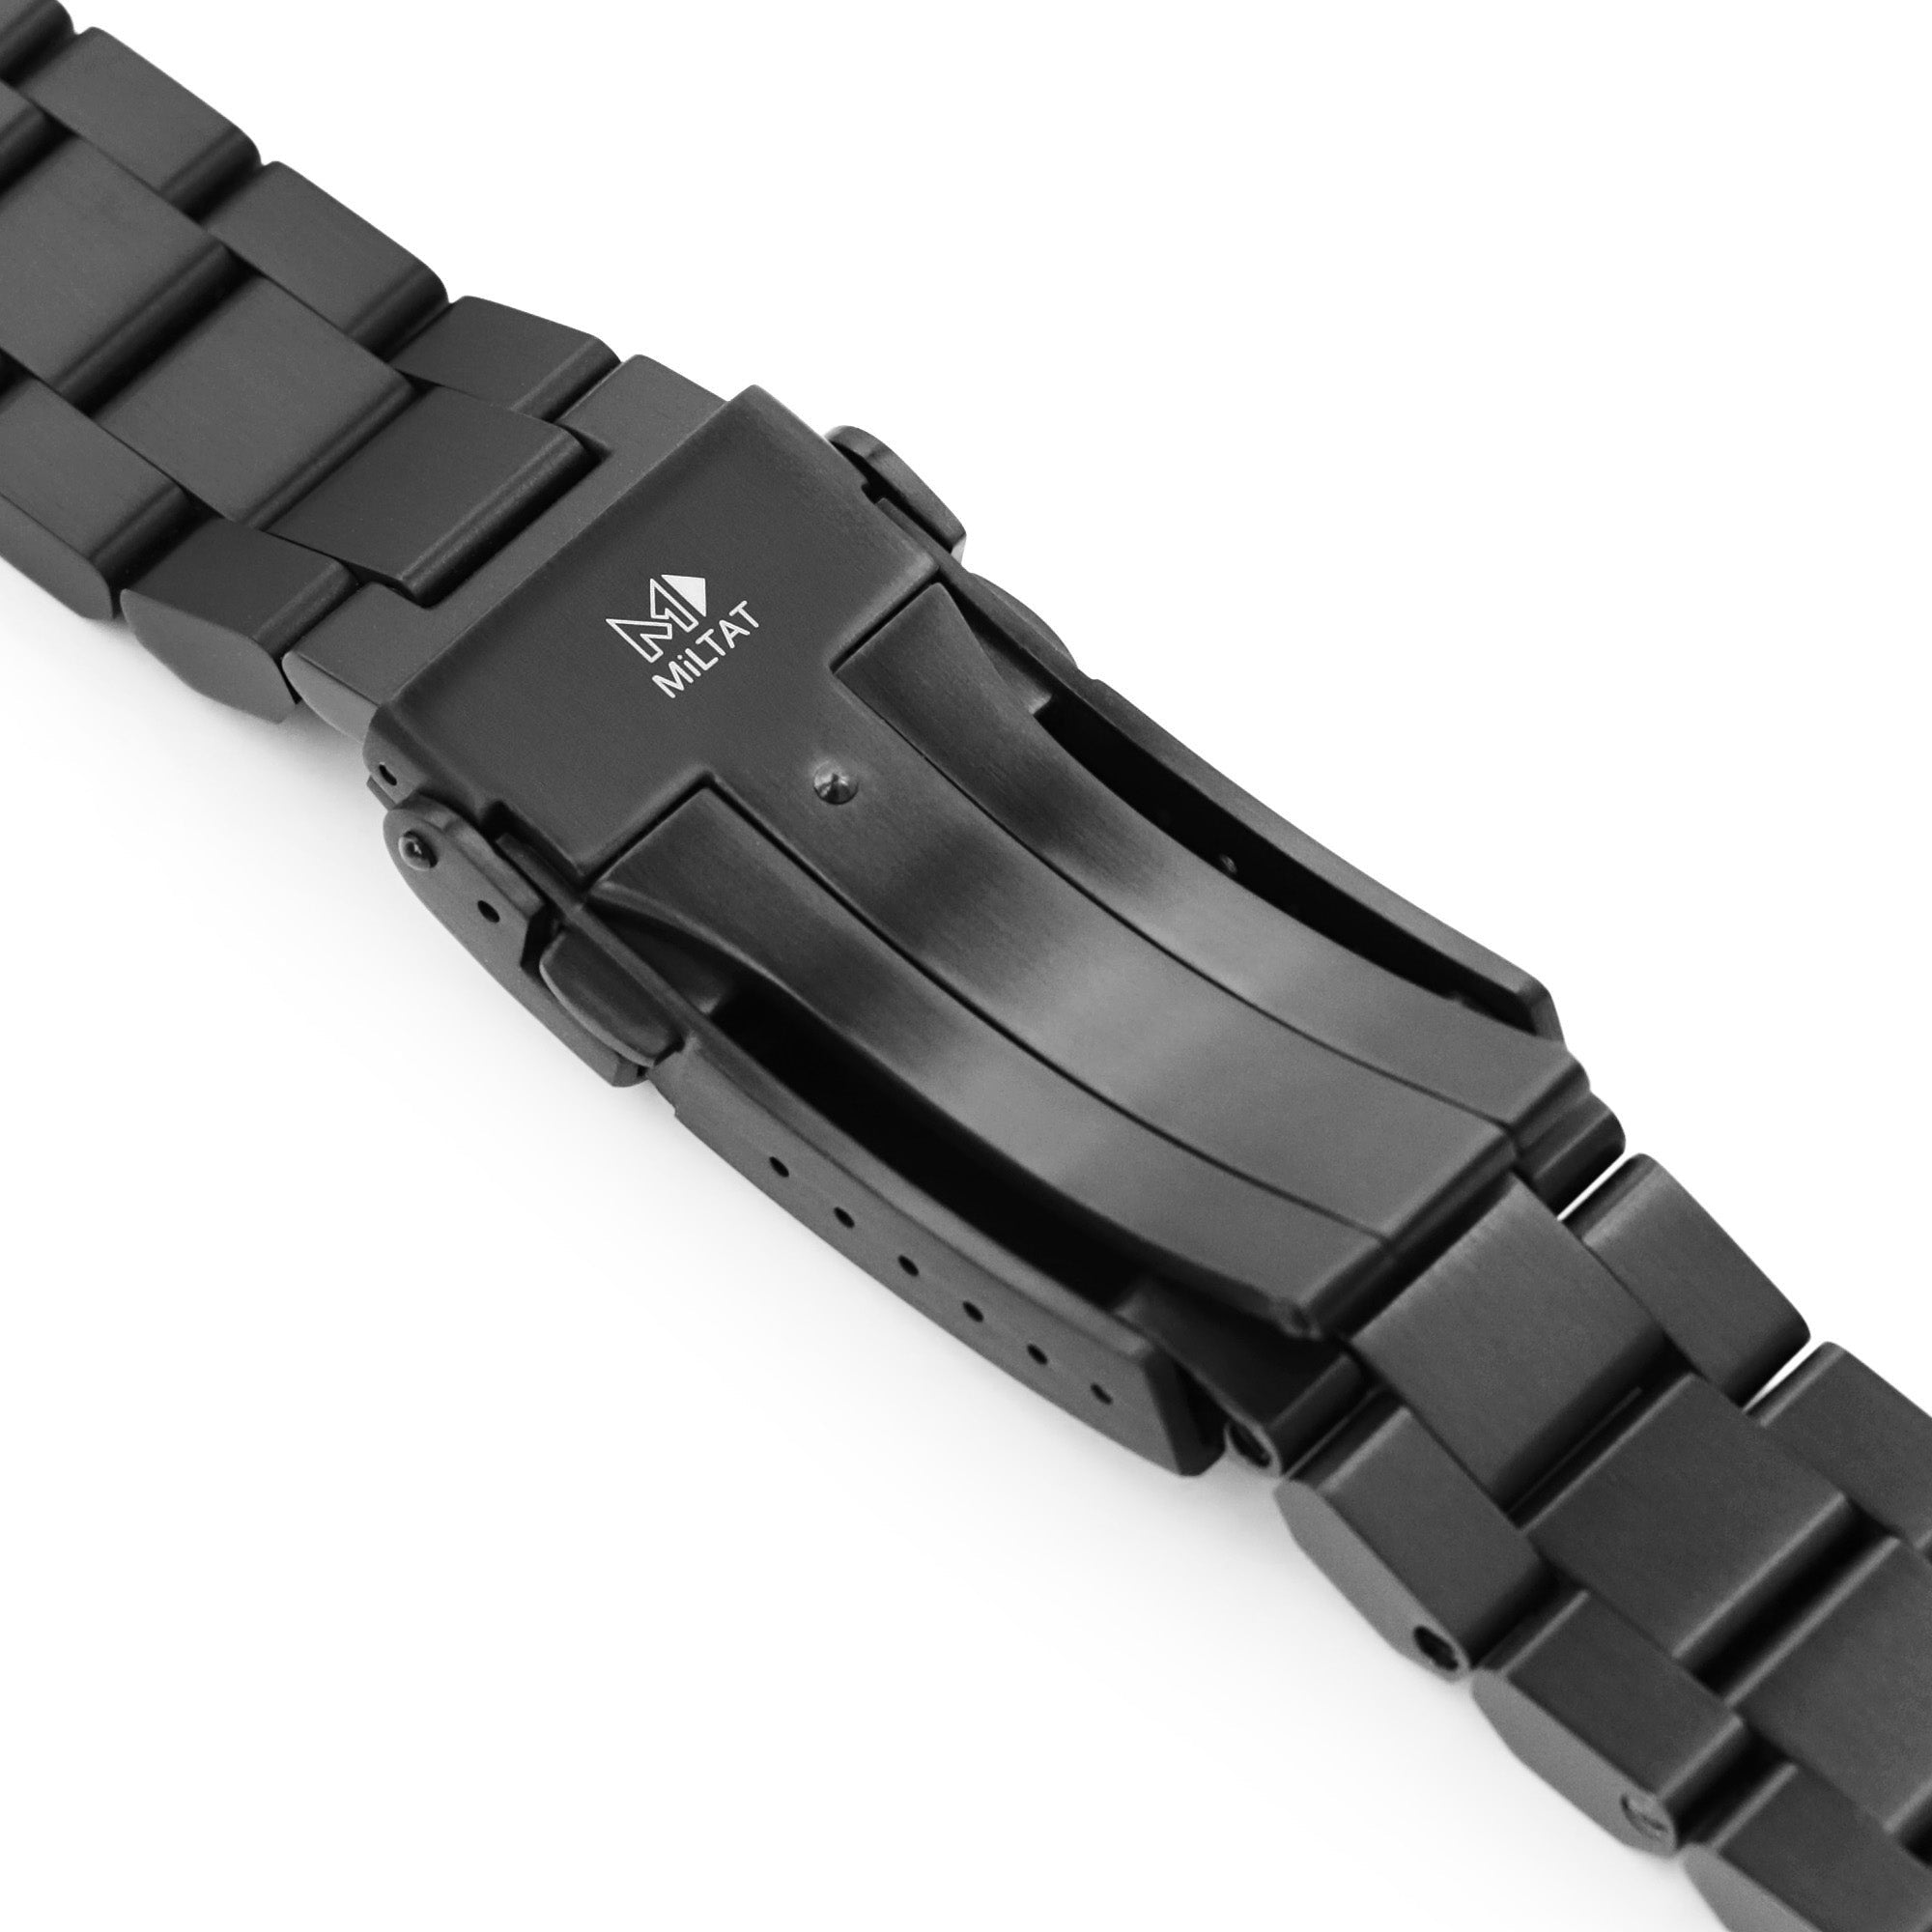 Seiko Samurai SRPB51 Curved End Hexad Watch Bands | Strapcode